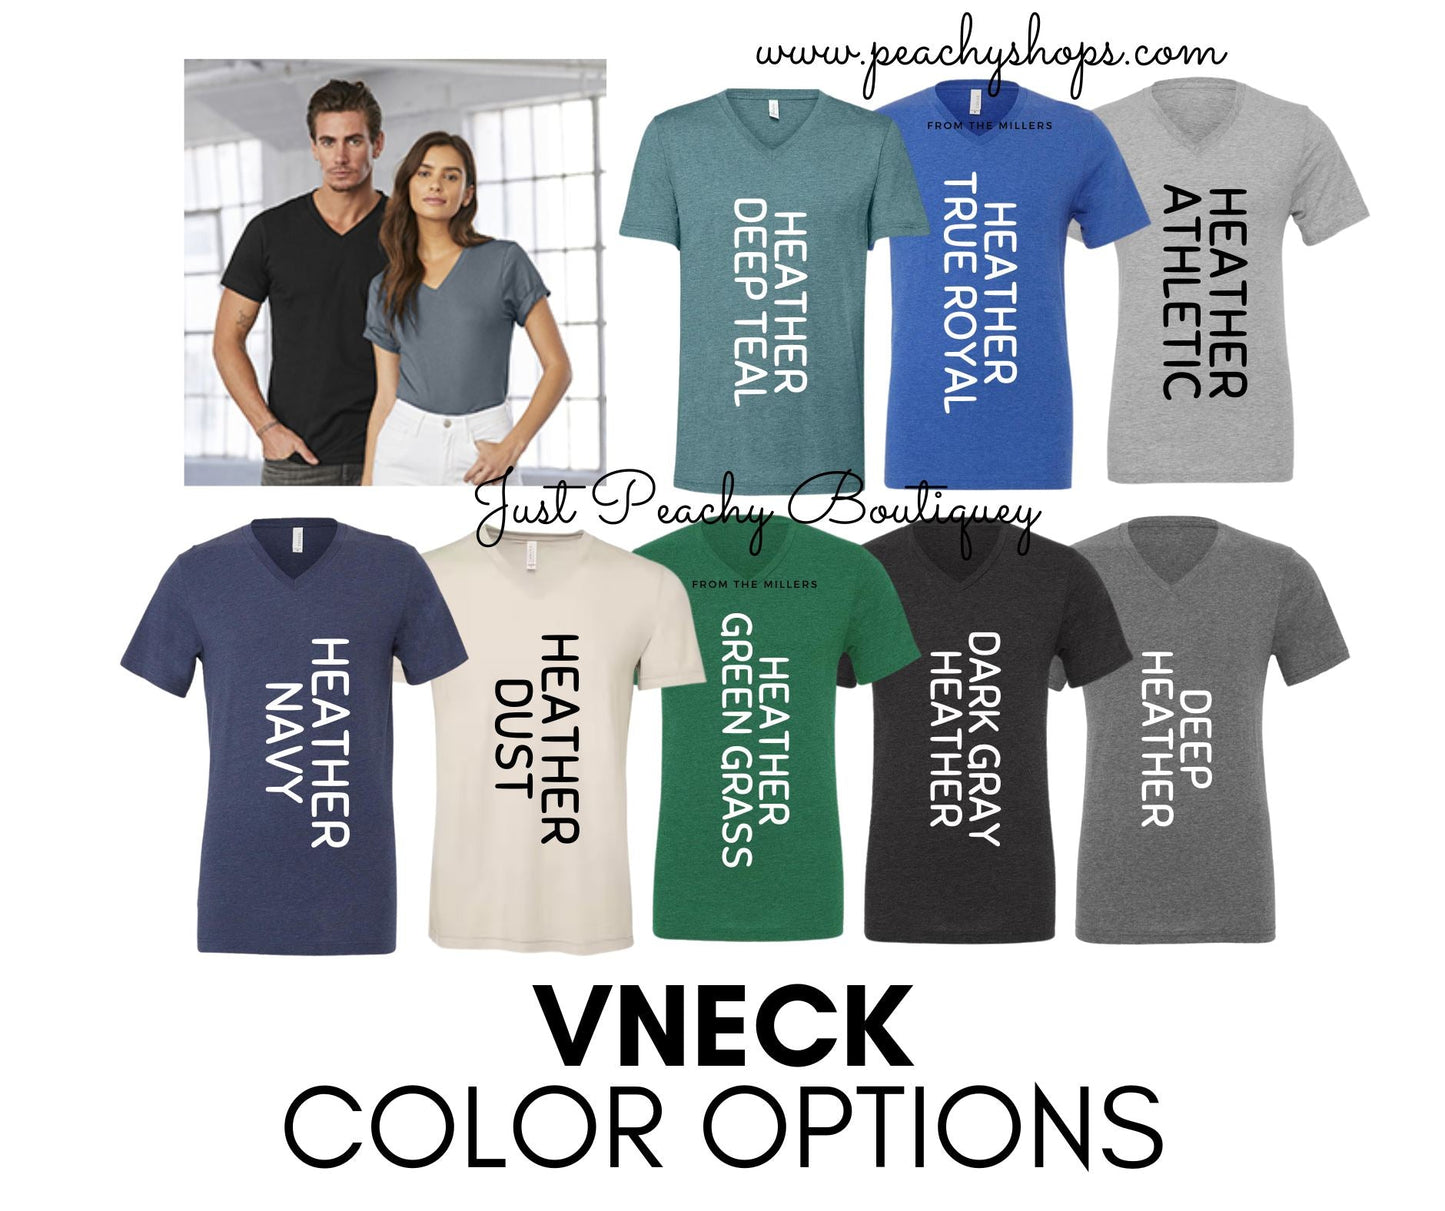 FRIES BEFORE GUYS VALENTINE'S DAY T-SHIRT OR PICK FROM 200 COLOR & STYLE OPTIONS! - TAT 4-7 DAYS